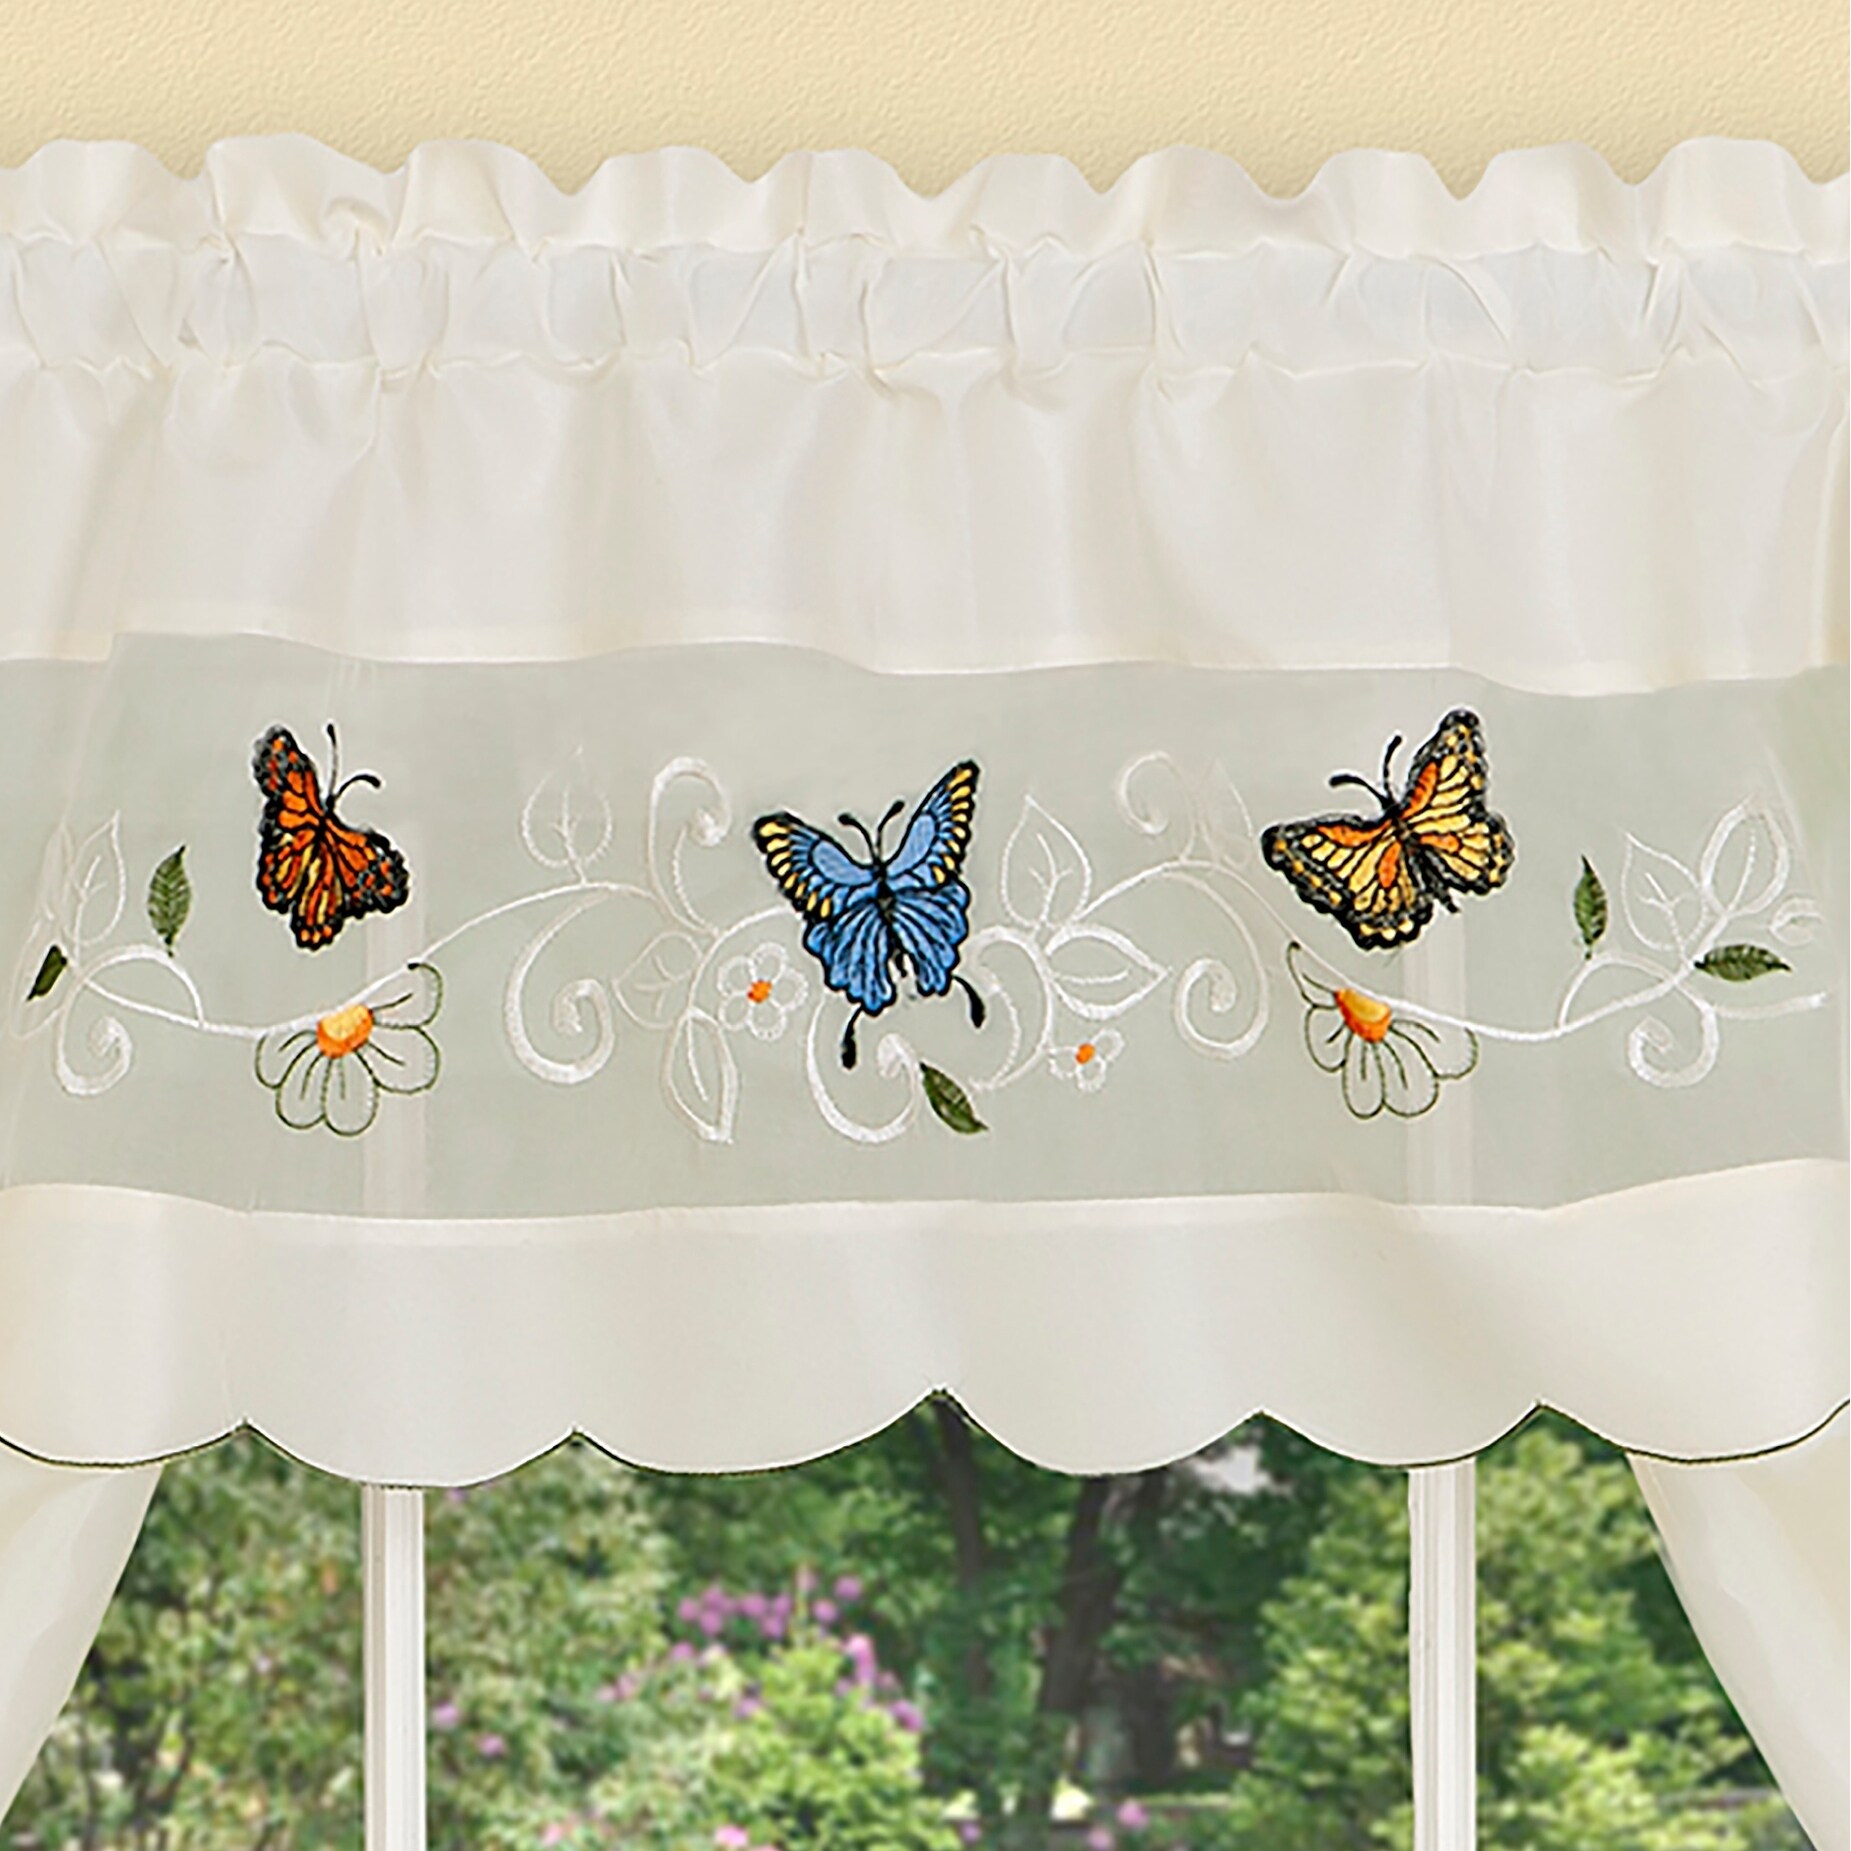 58x36" Embellished Cottage Curtains Set COLORFUL BUTTERFLIES,DAISY MEADOW,Achim